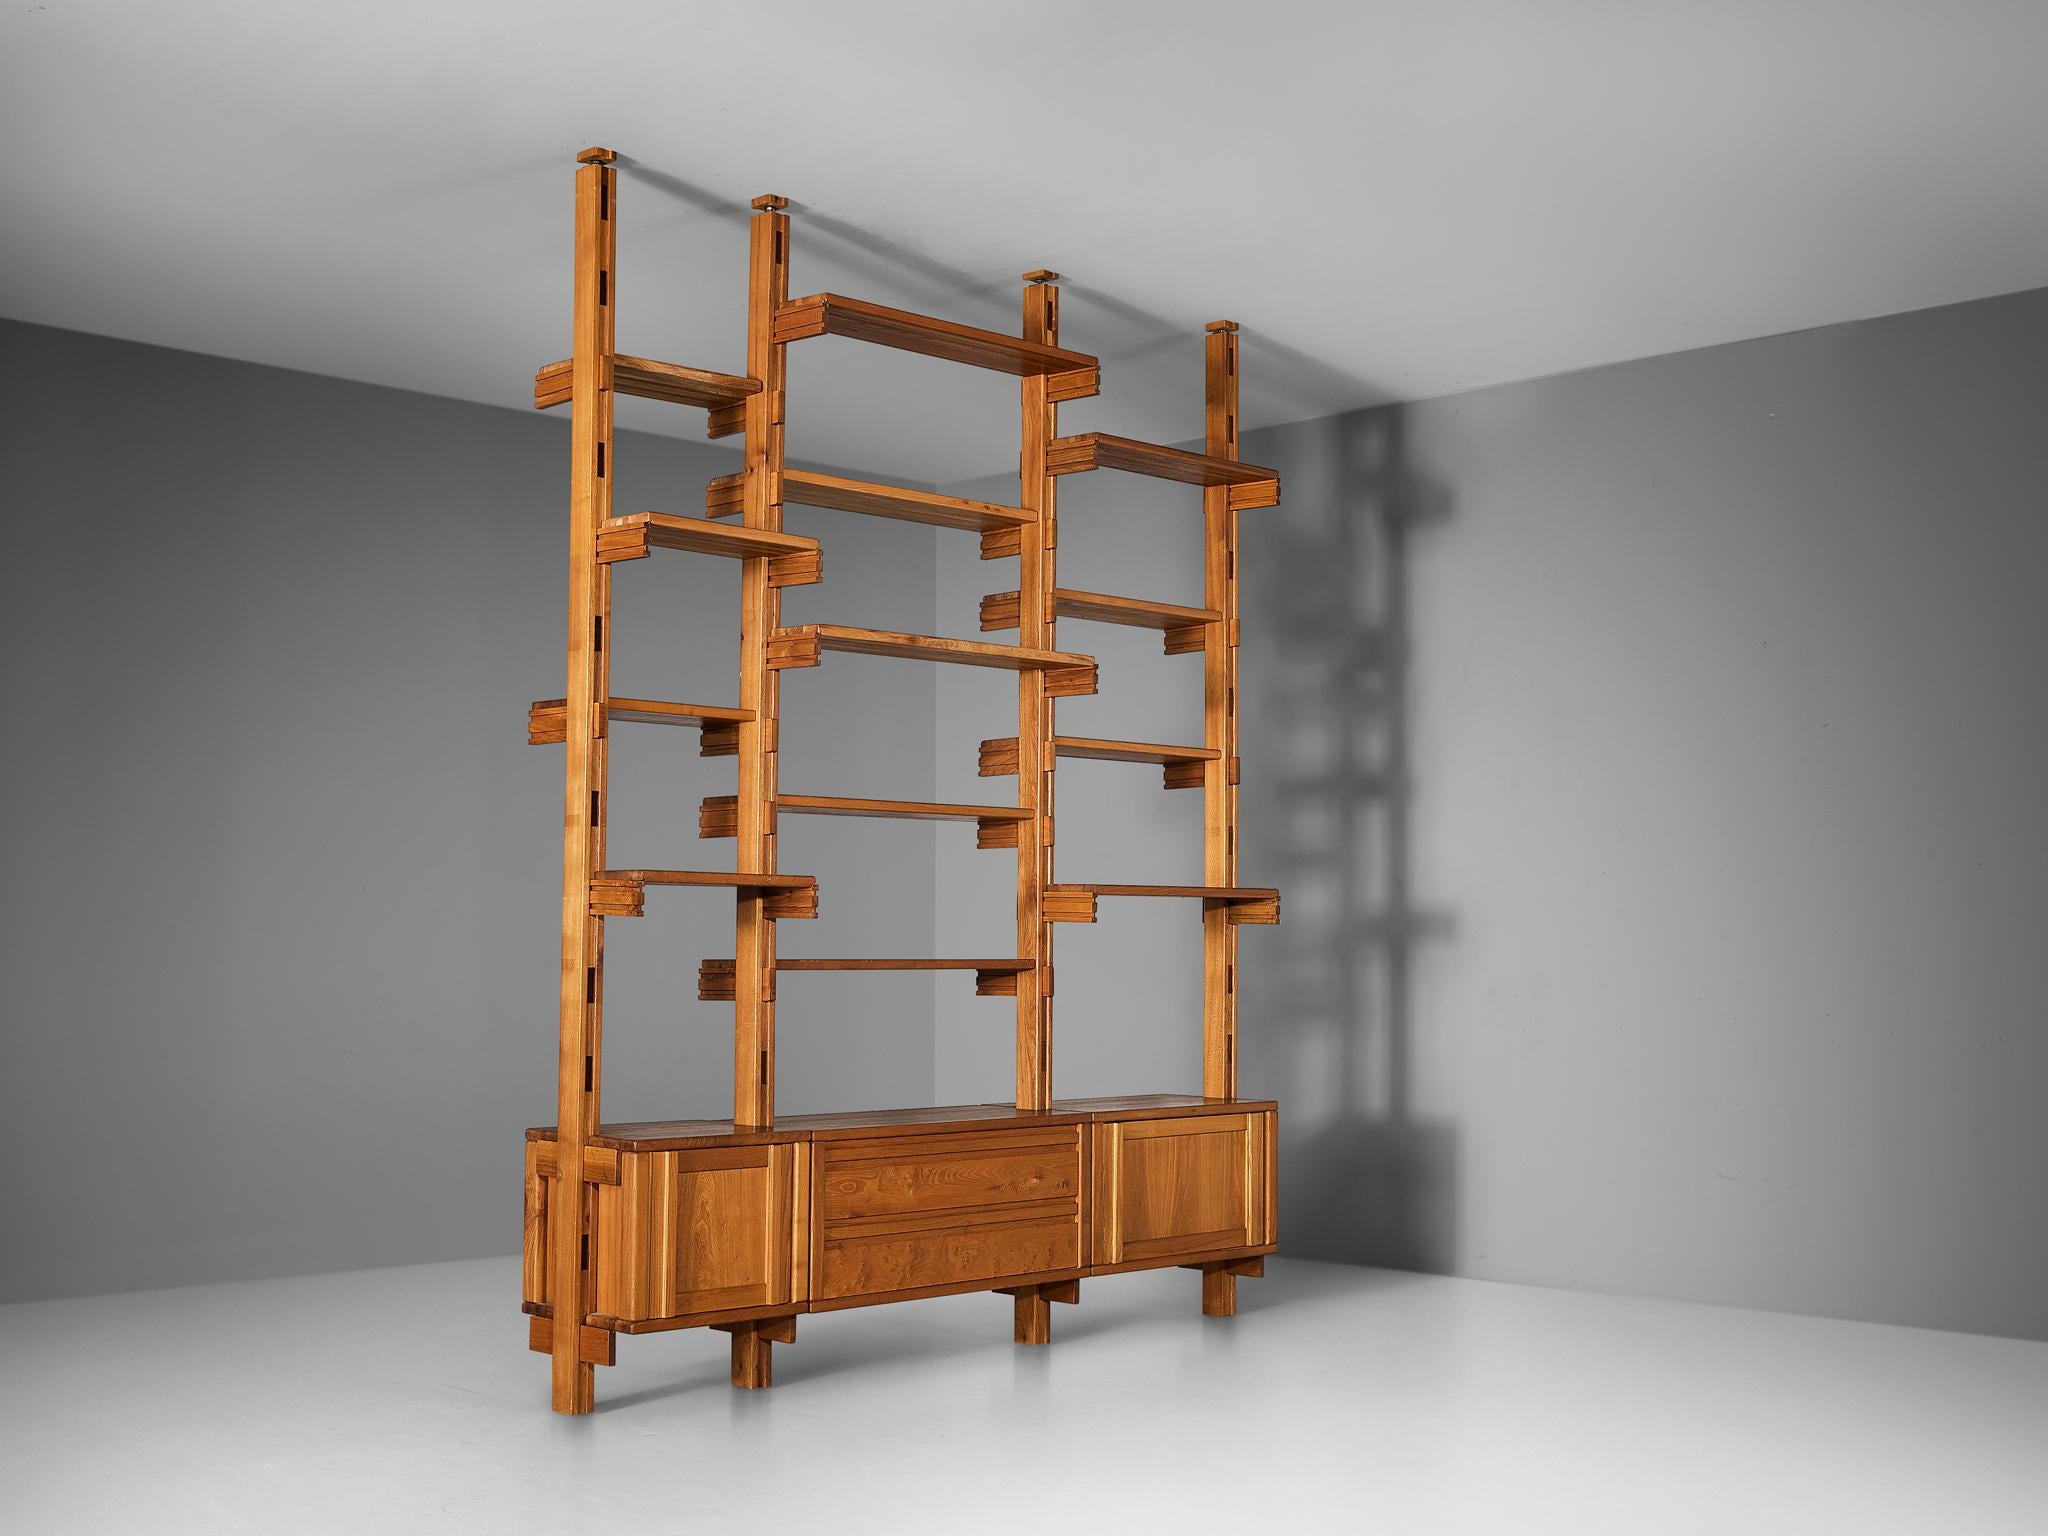 Galerie l'Orme, modular wall unit, elm, France, 1970s

Dazzling French modular wall unit manufactured by Galerie l'Orme in Paris. Executed in solid elm, this modular piece exhibits a sturdy wooden frame with a dynamic grain pattern and joinery that